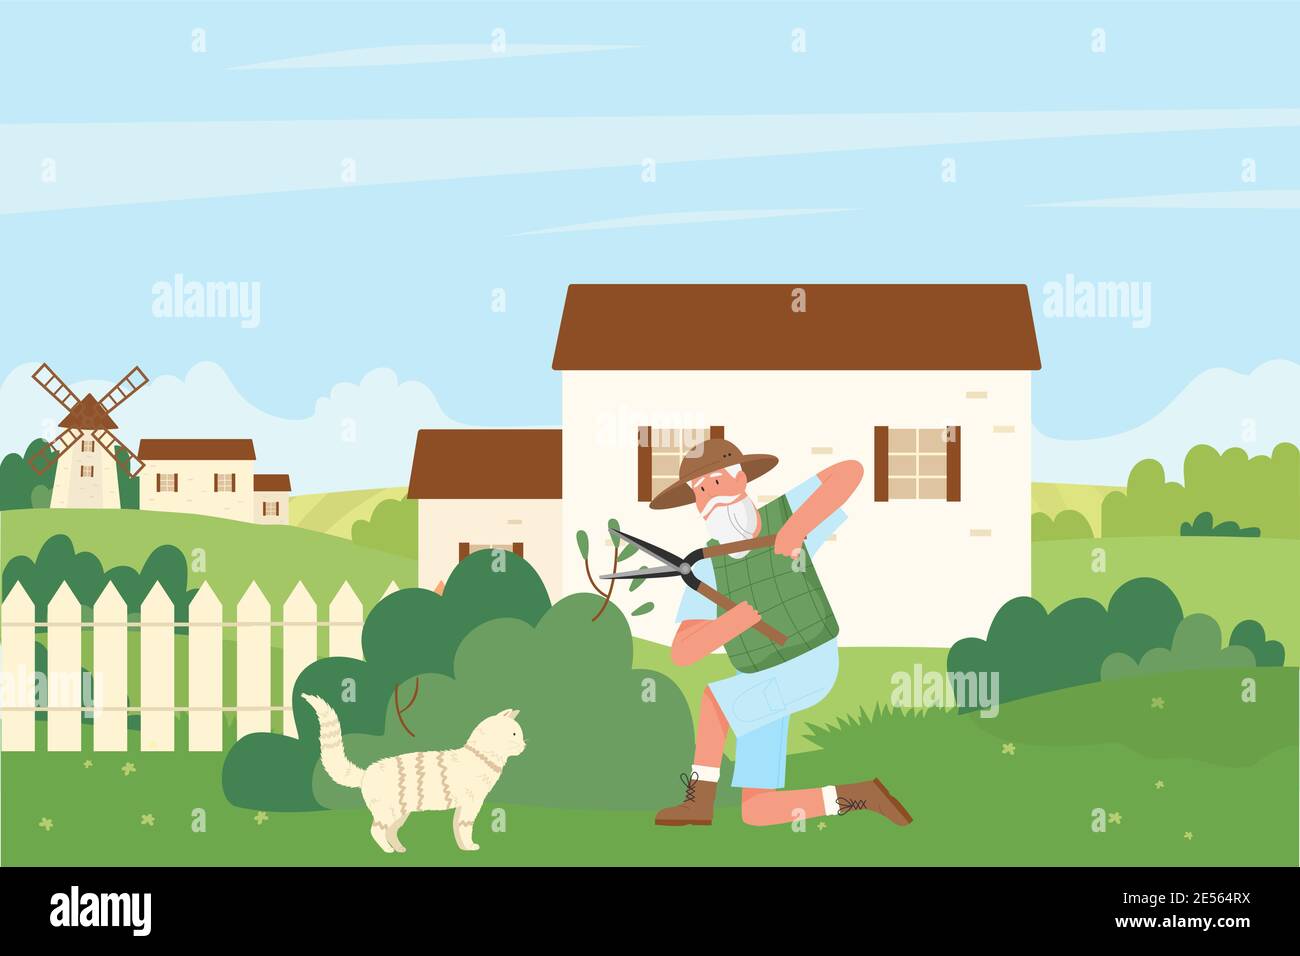 Gardener cutting green bush hedge vector illustration. Cartoon elderly senior man character trimming lawn, working in summer garden or park, holding pruning shears trimmers to trim greenery background Stock Vector